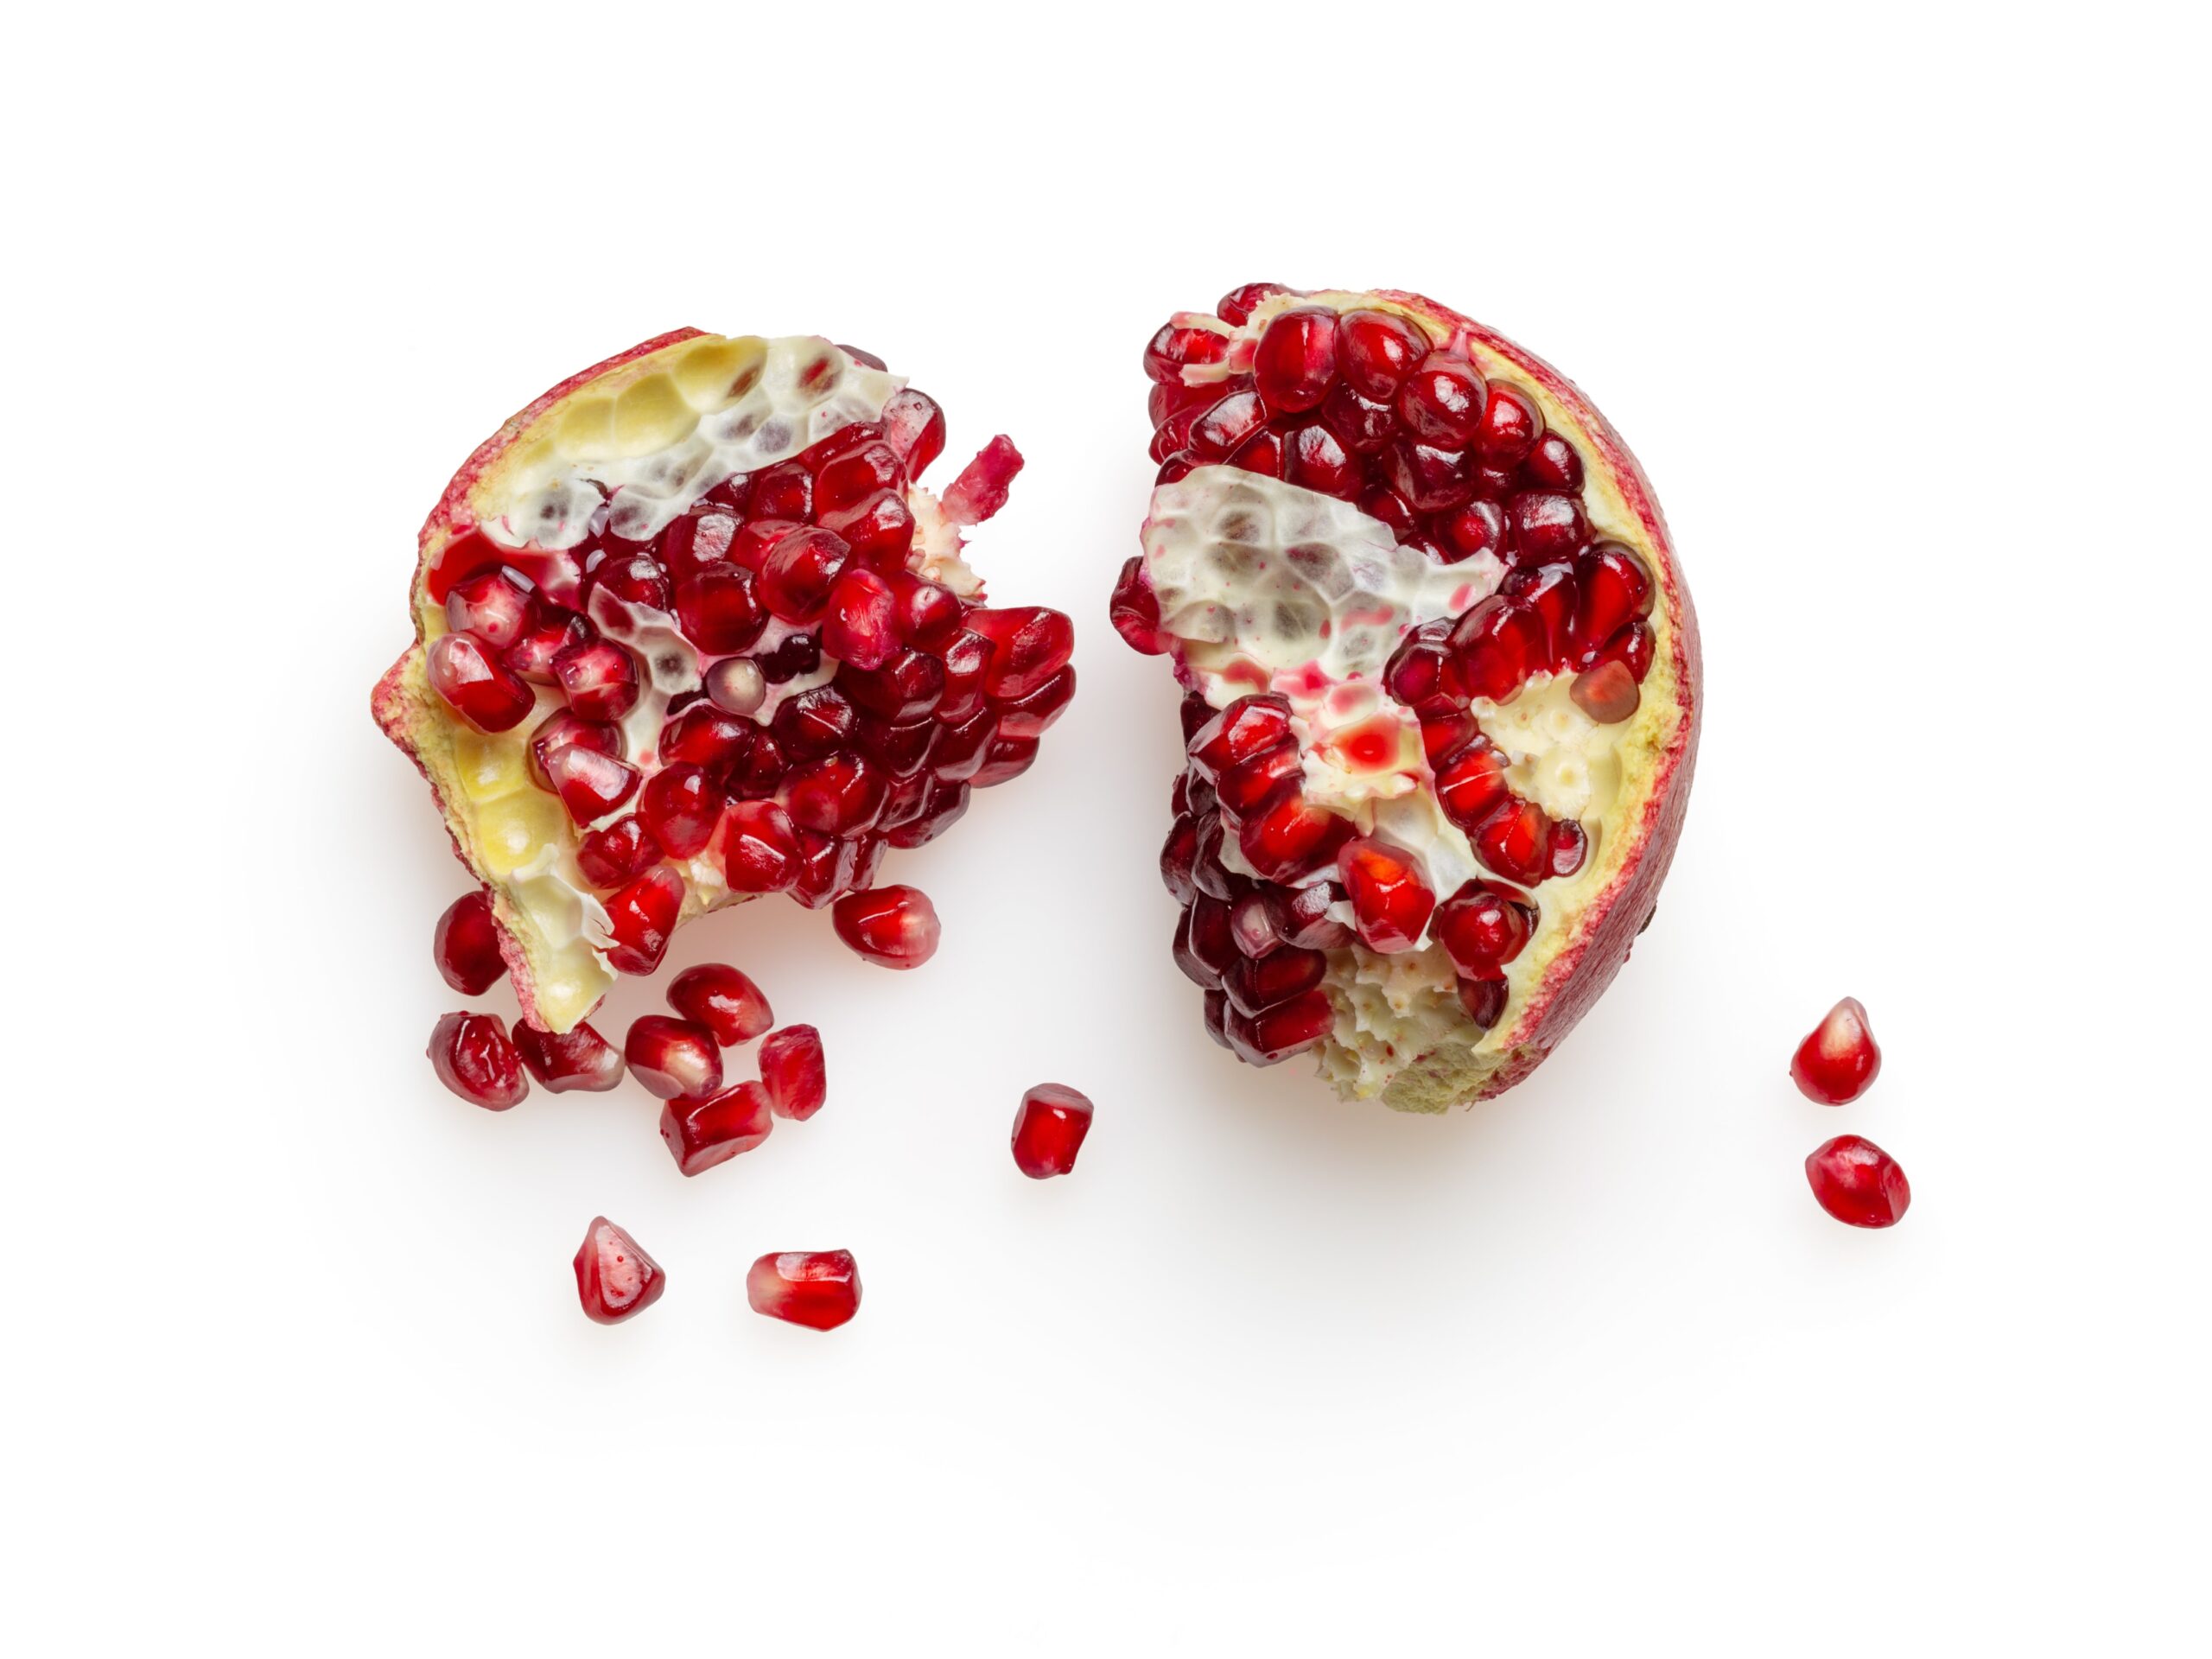 A pomegranate cut in half with some seeds displaced